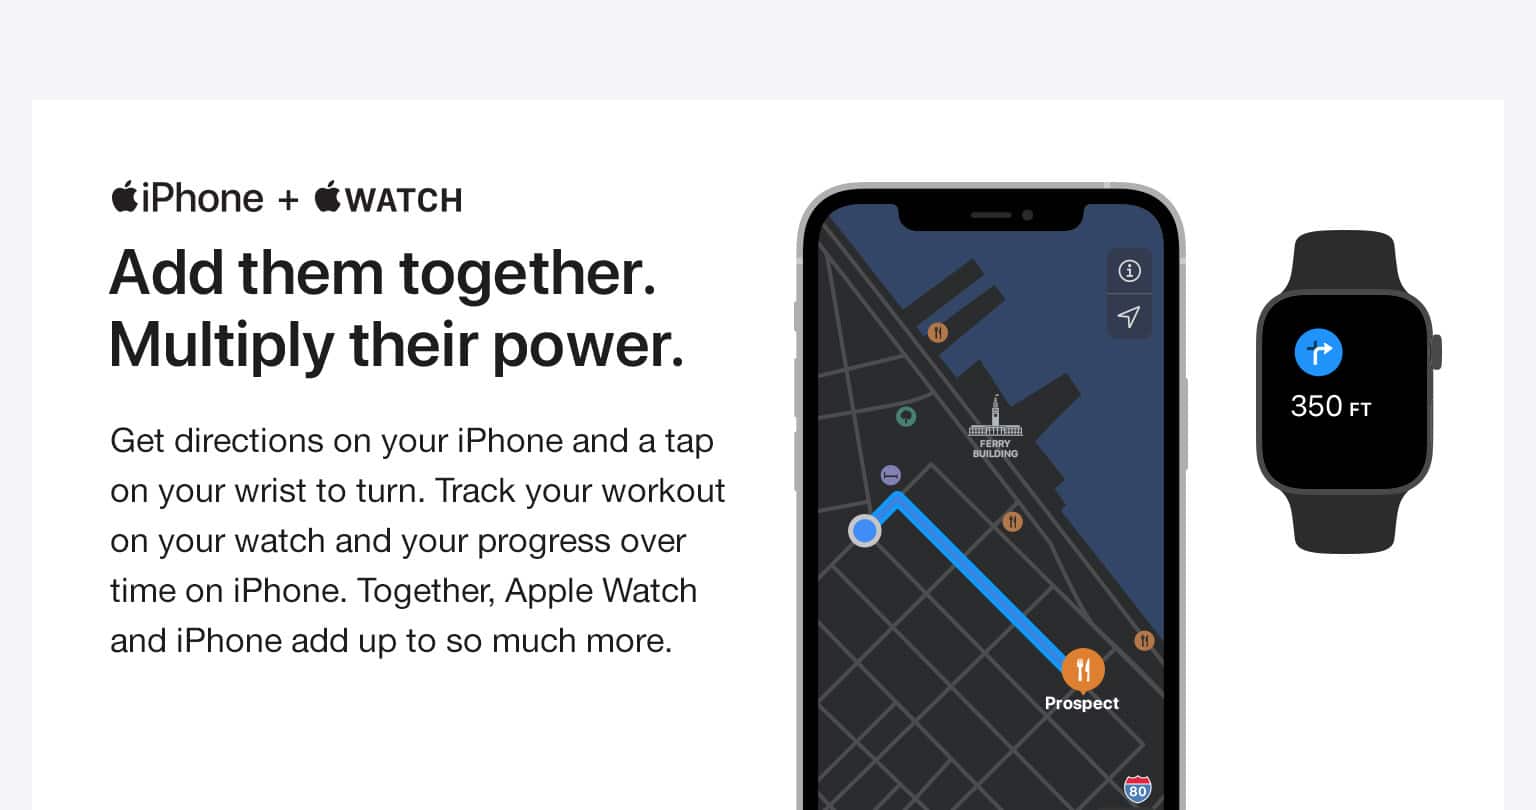 iPhone + WATCH. Add them together. Multiply their power. Get directions on your iPhone and a tap on your wrist to turn. Track your workout on your watch and your progress over time on iPhone. Together, Apple Watch and iPhone add up to so much more.